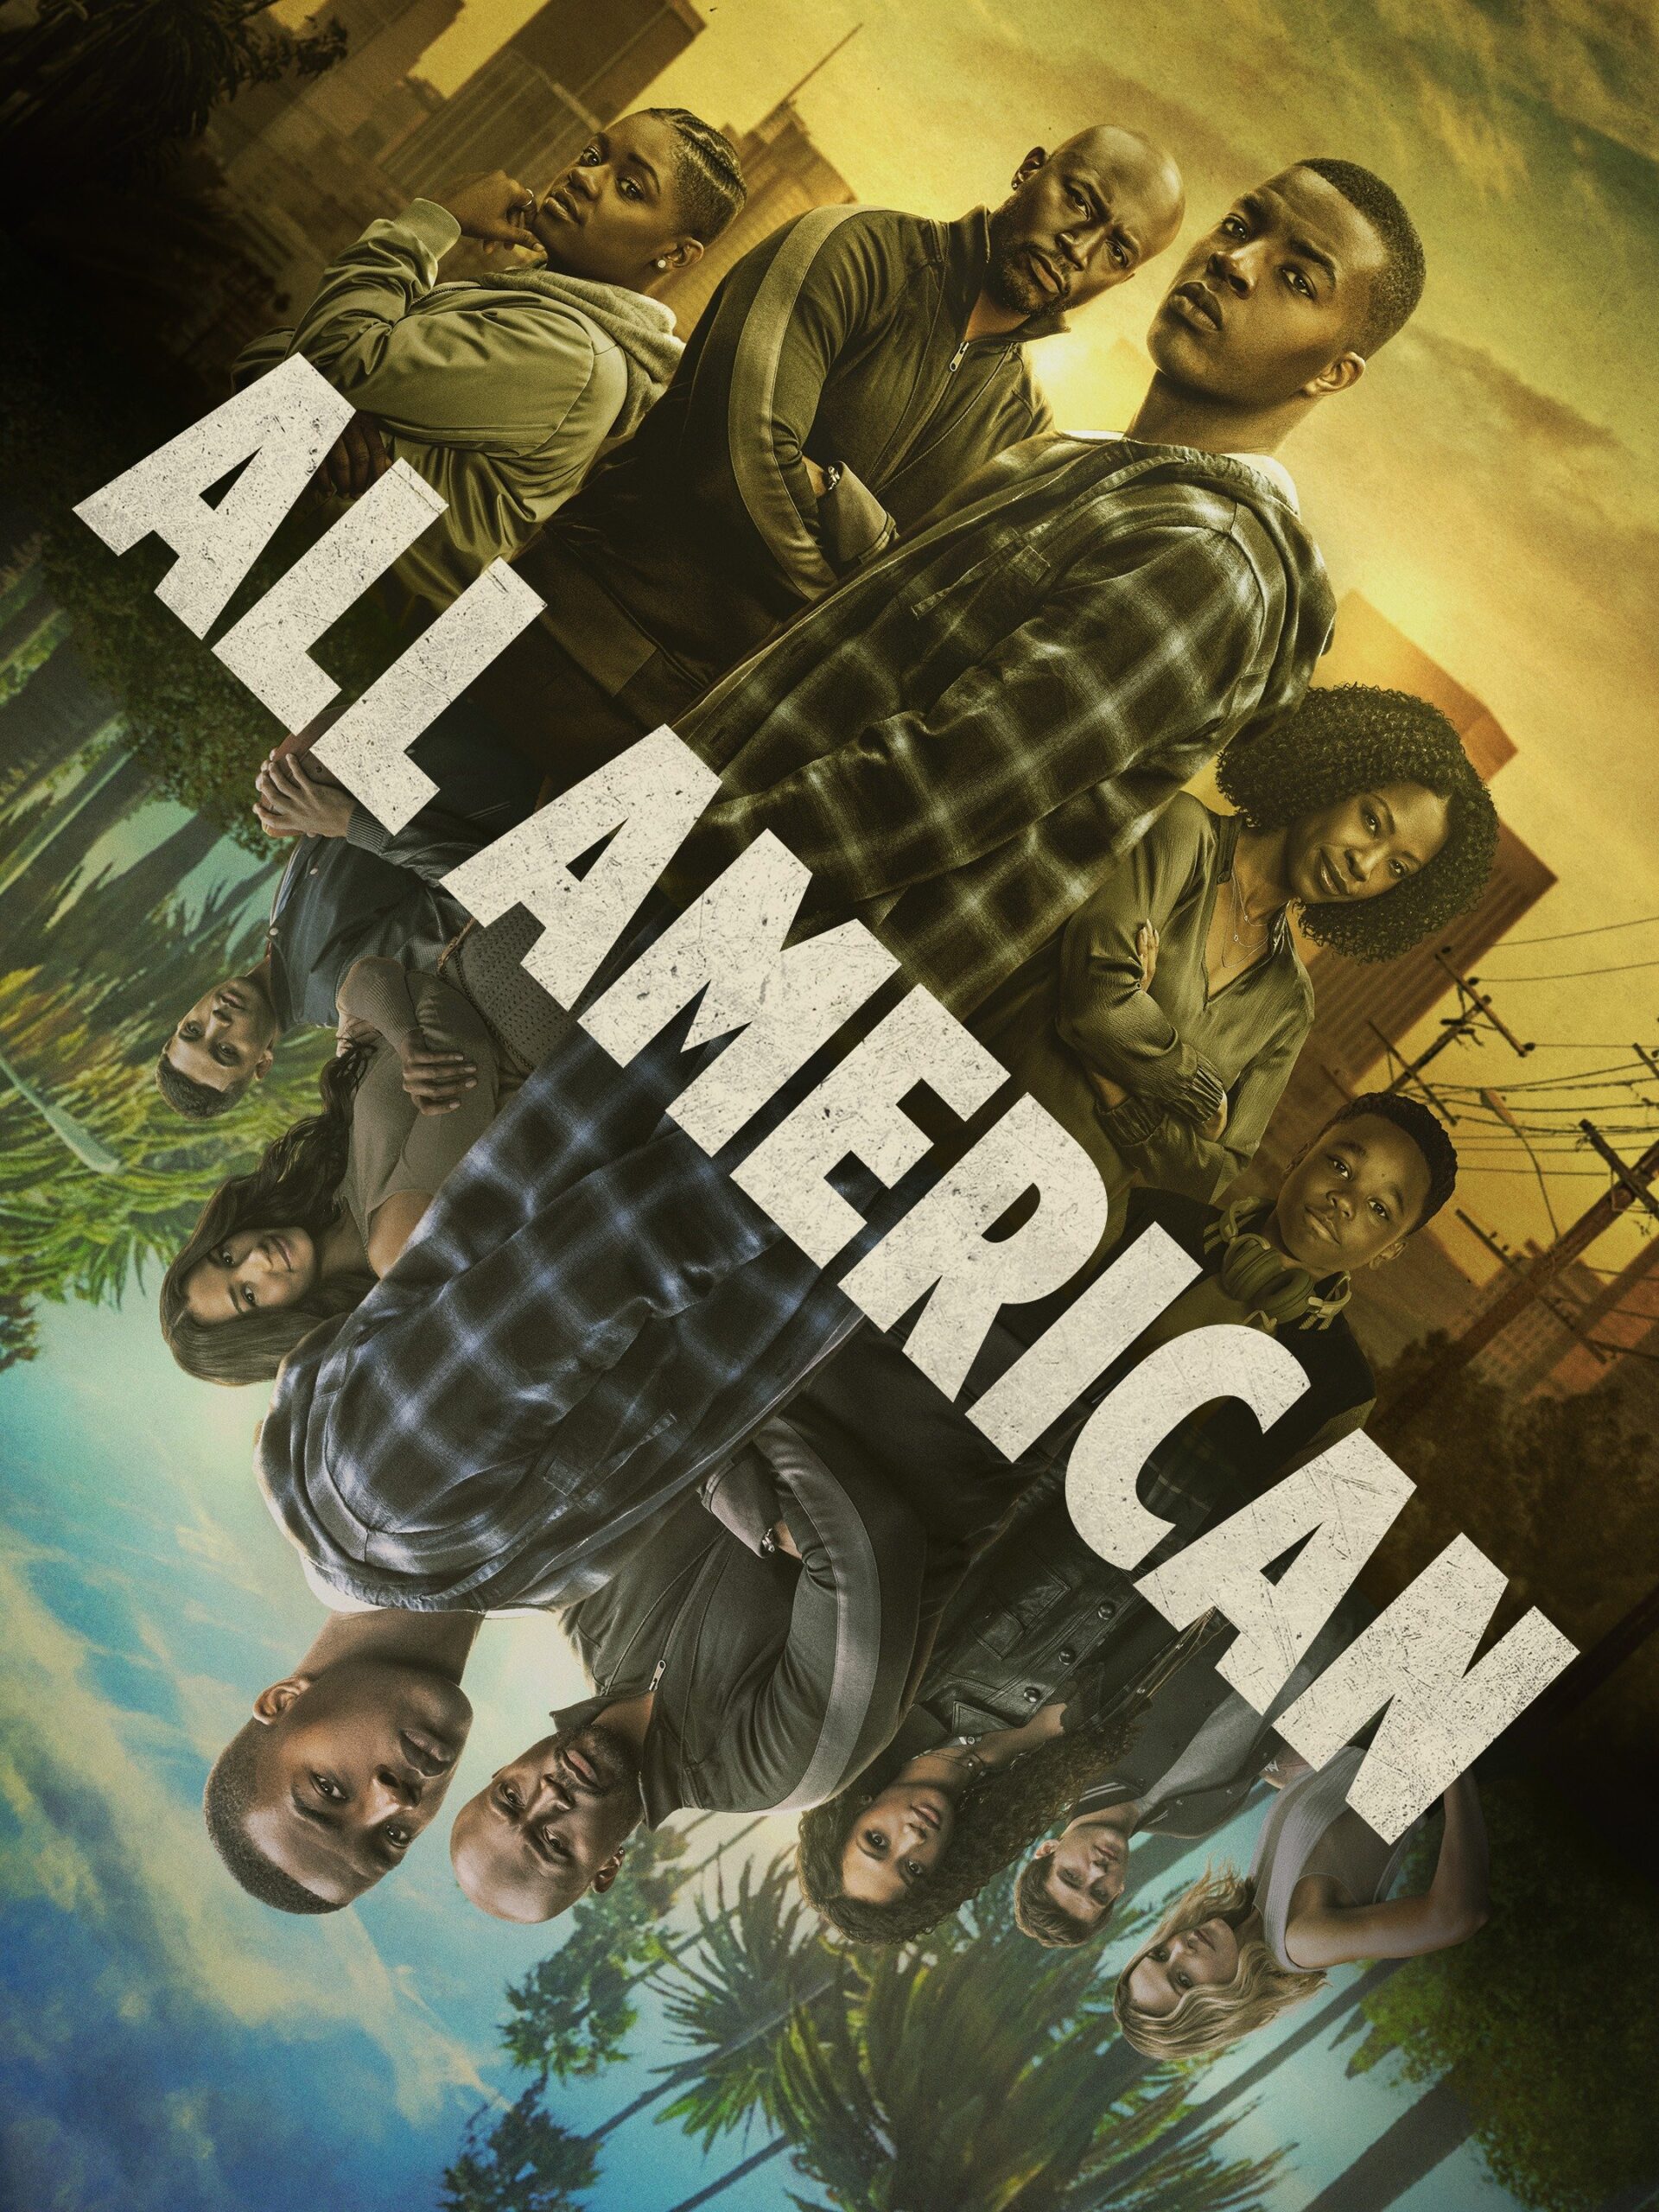 All American, Series on The CW